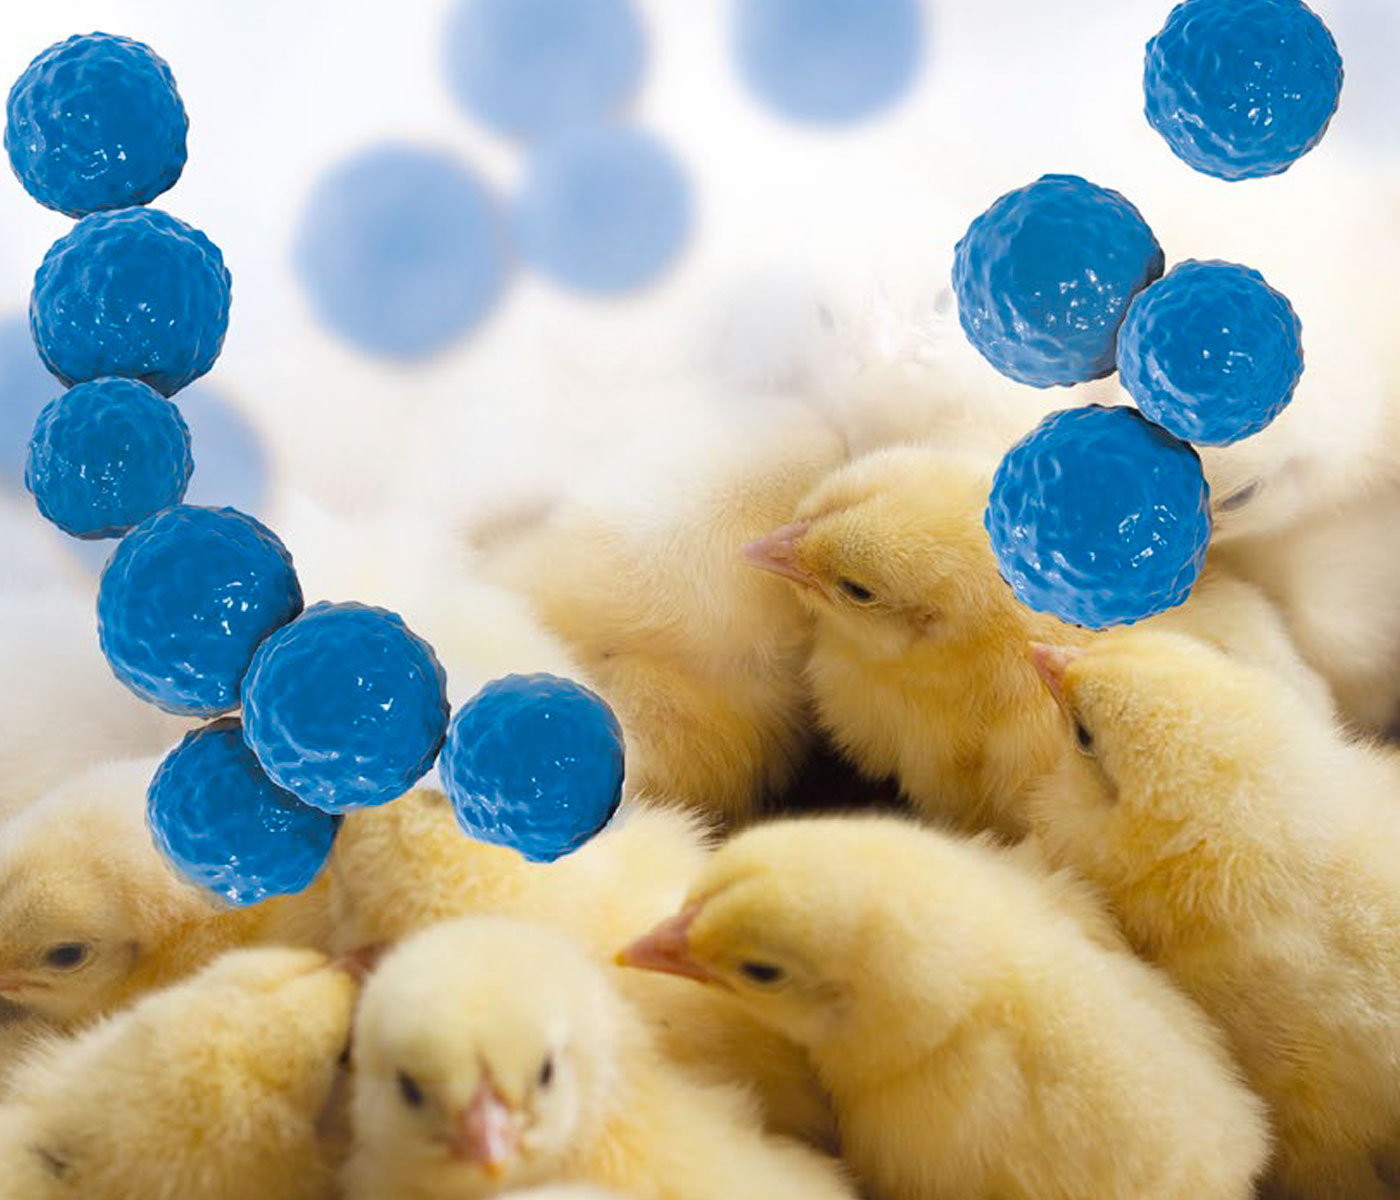 Enterococcus infections reduce hatchability and increase early mortality